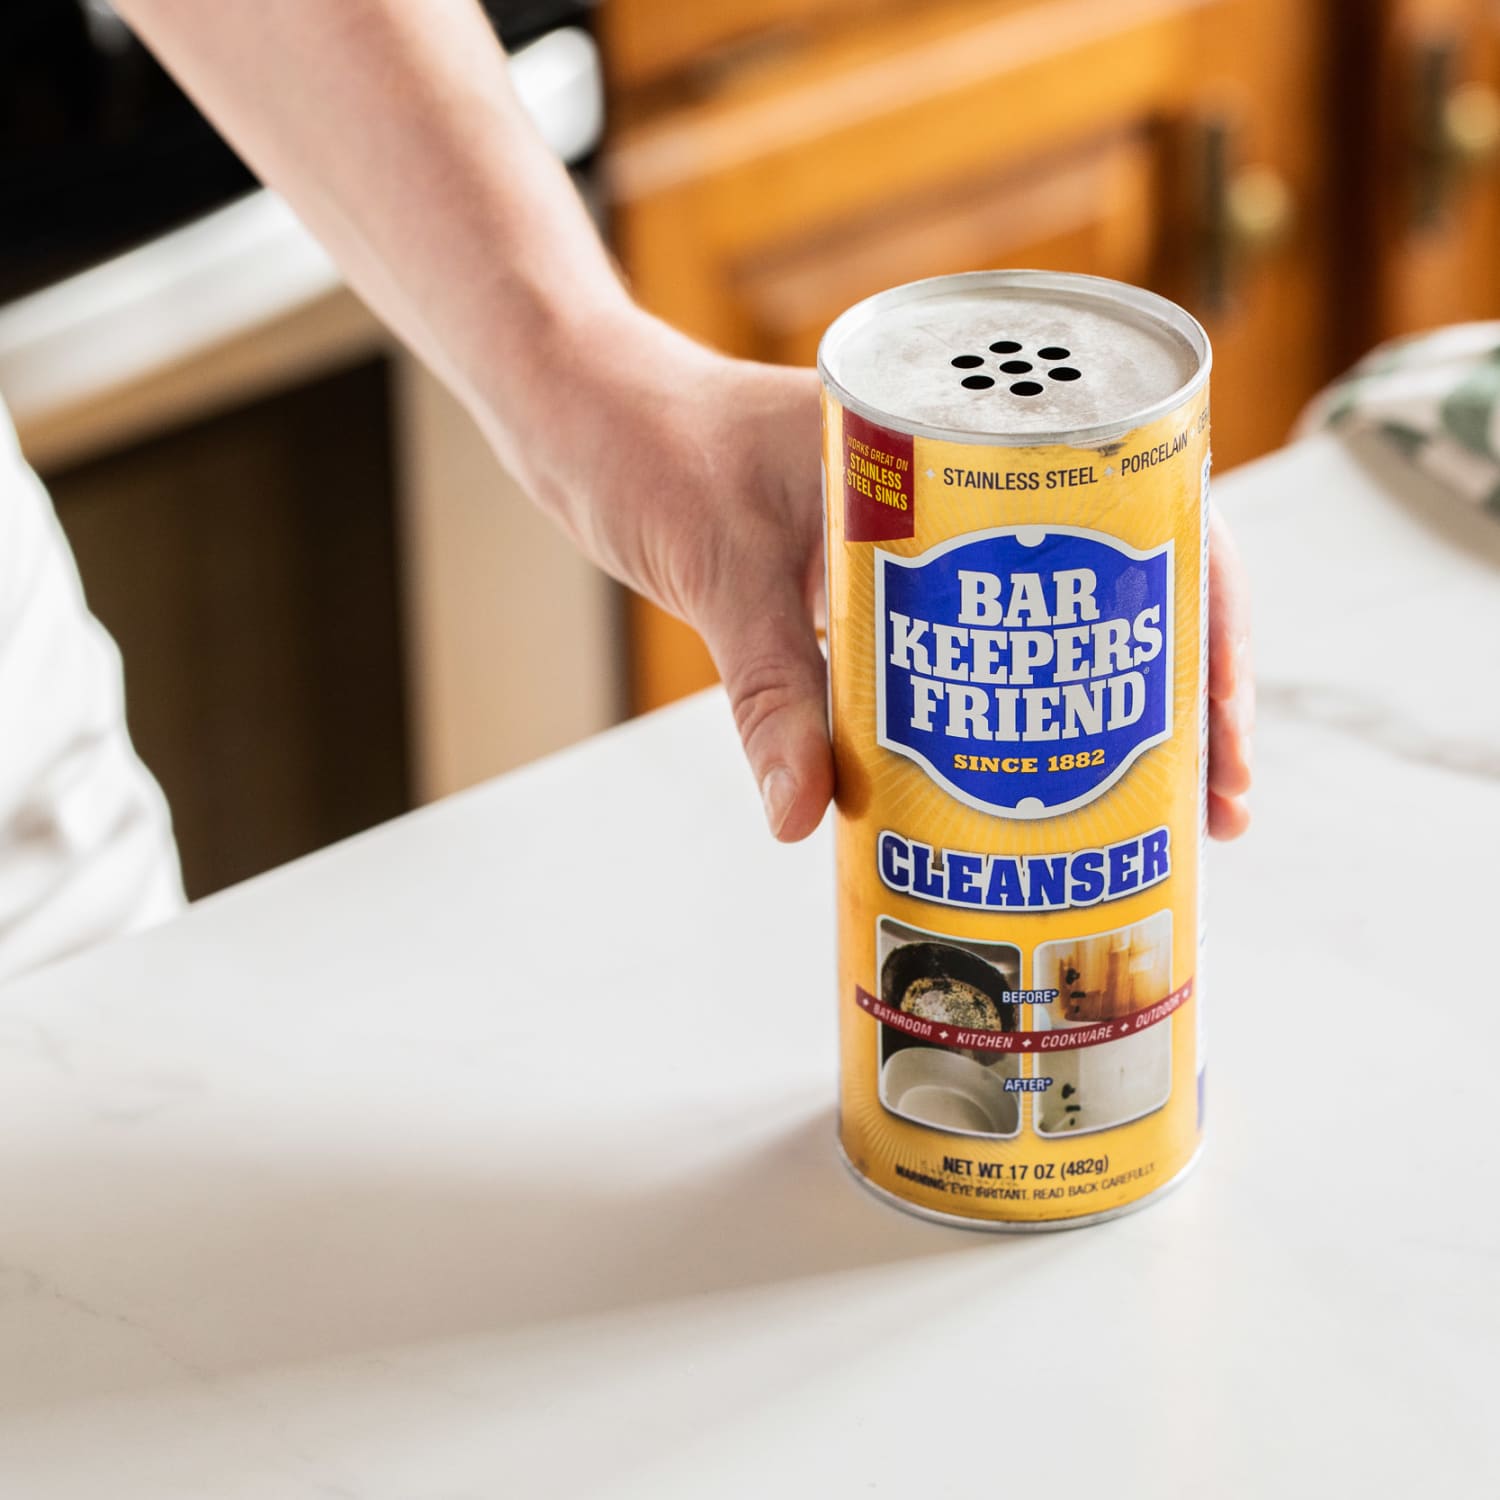 22 Things You'll Get Spotlessly Clean With Bar Keepers Friend